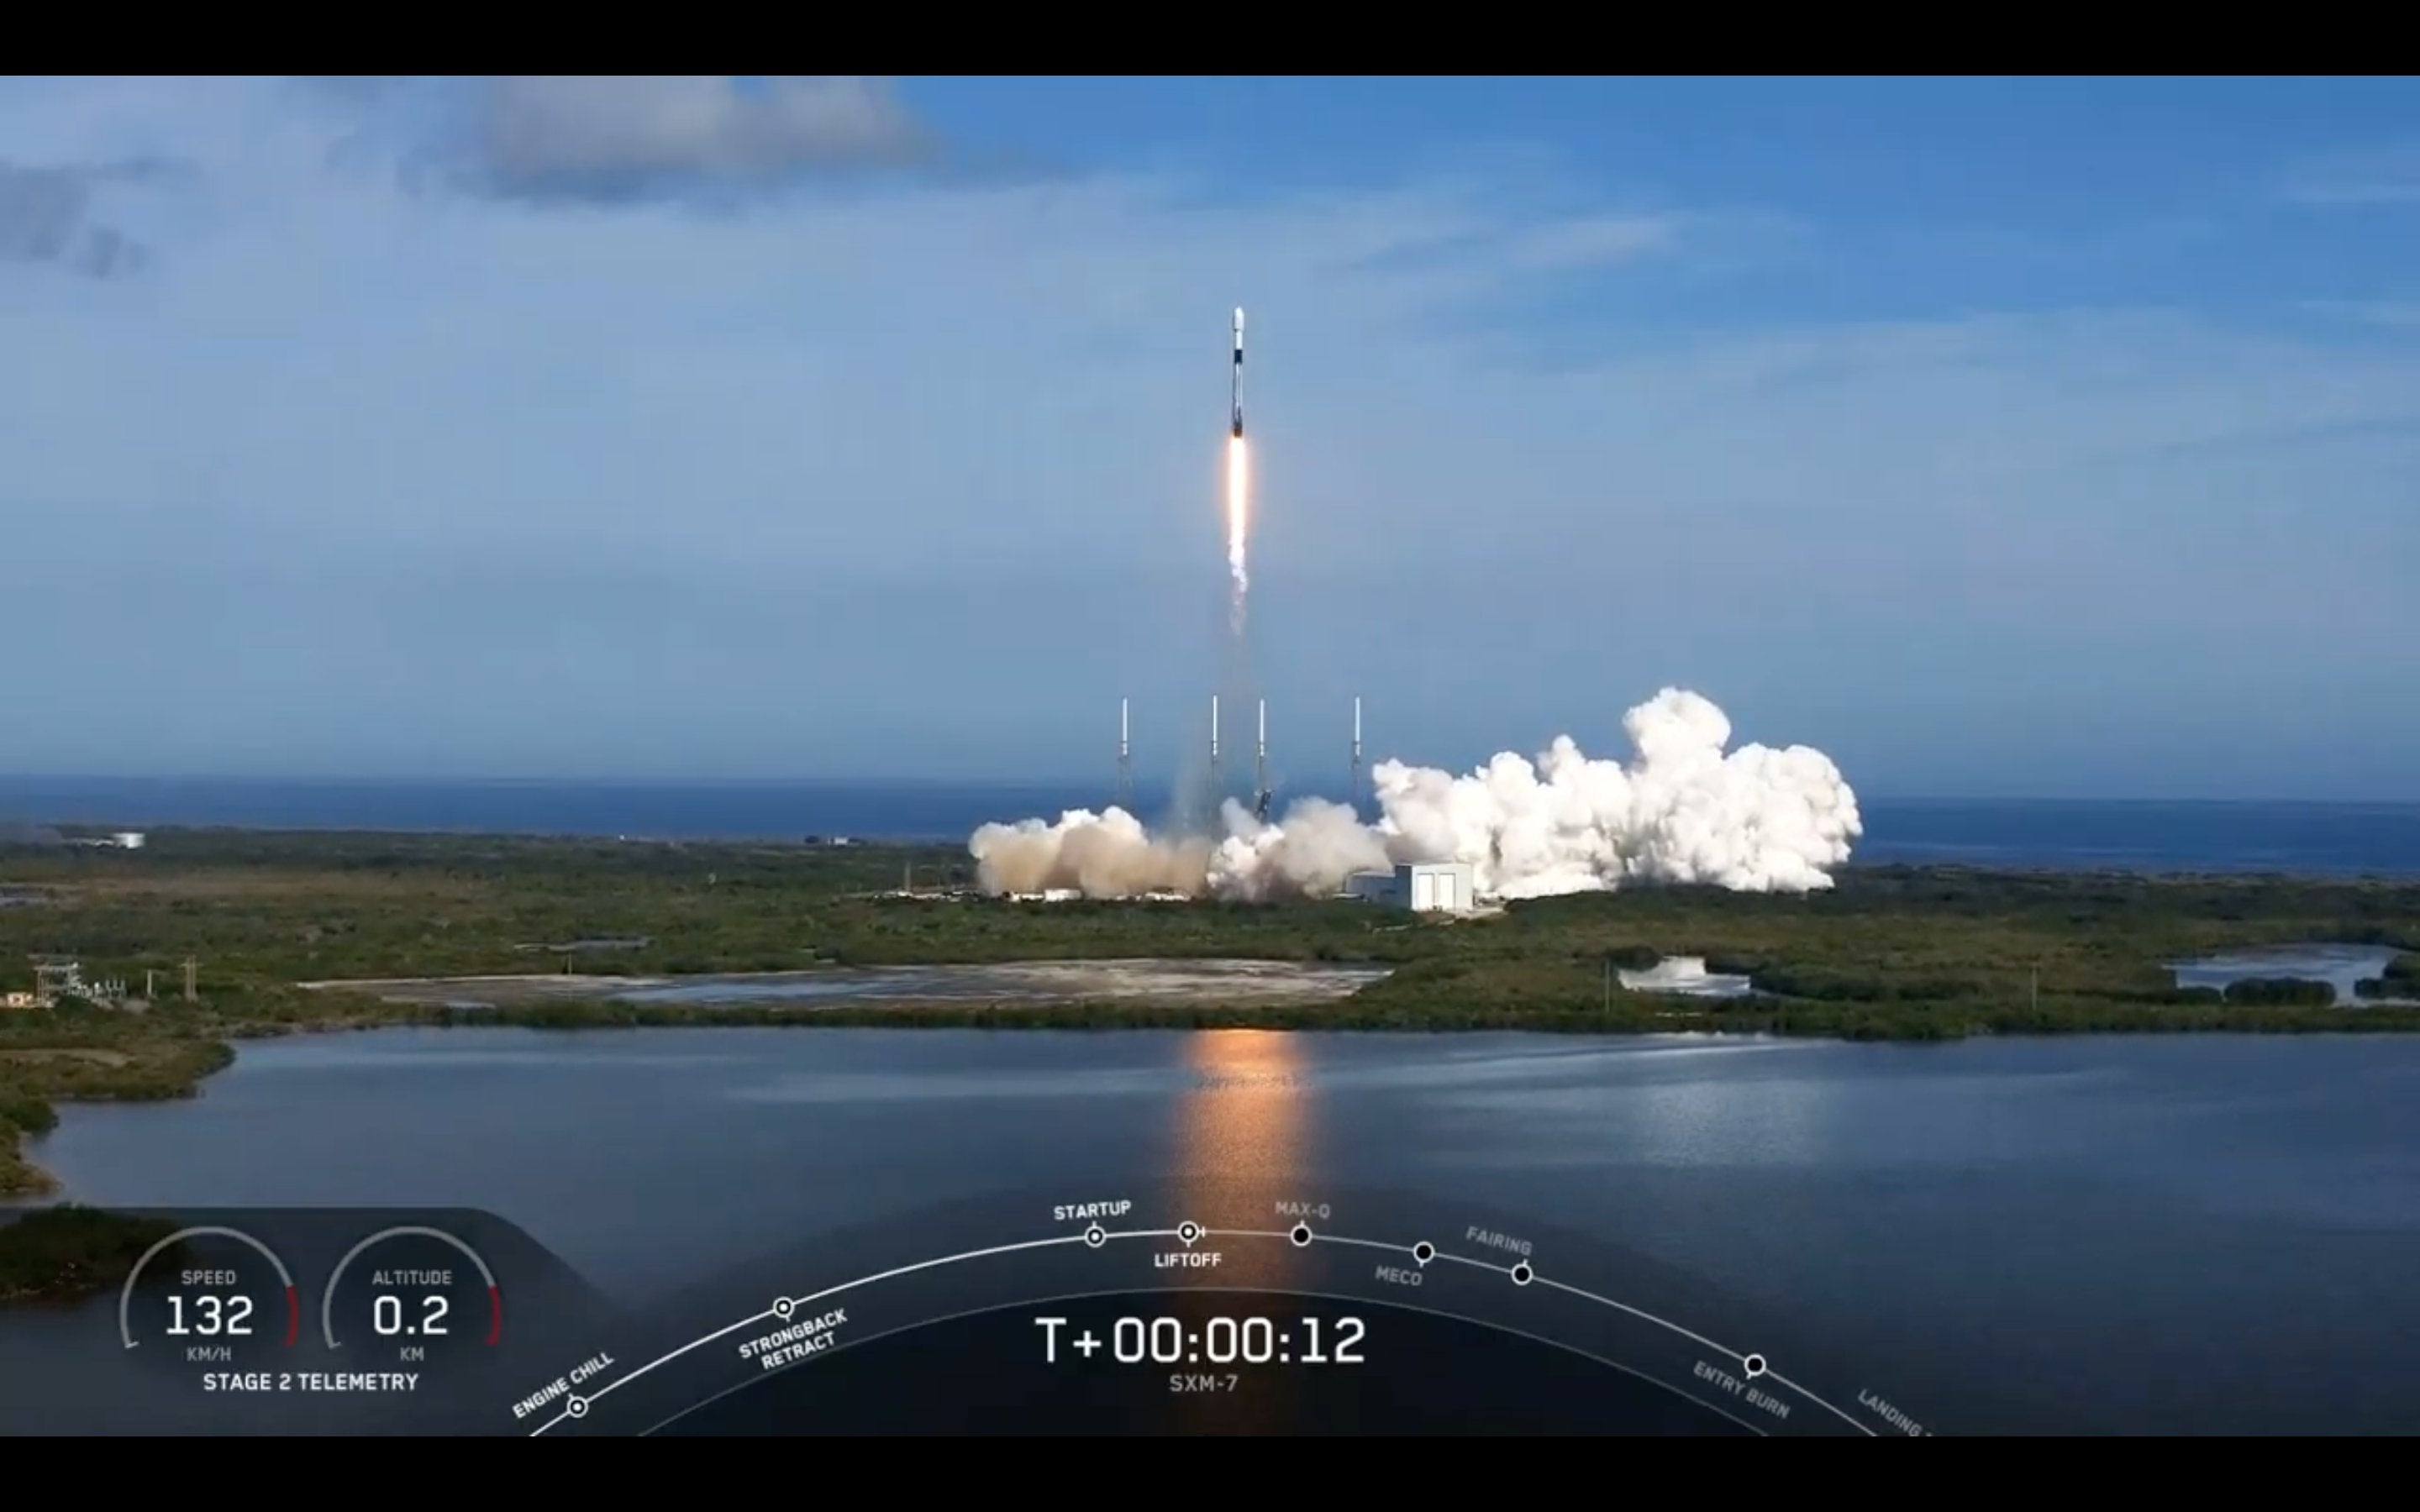 SpaceX Falcon 9 Lifts Off for the Seventh time to deploy SiriusXM's SXM-7 Radio Satellite